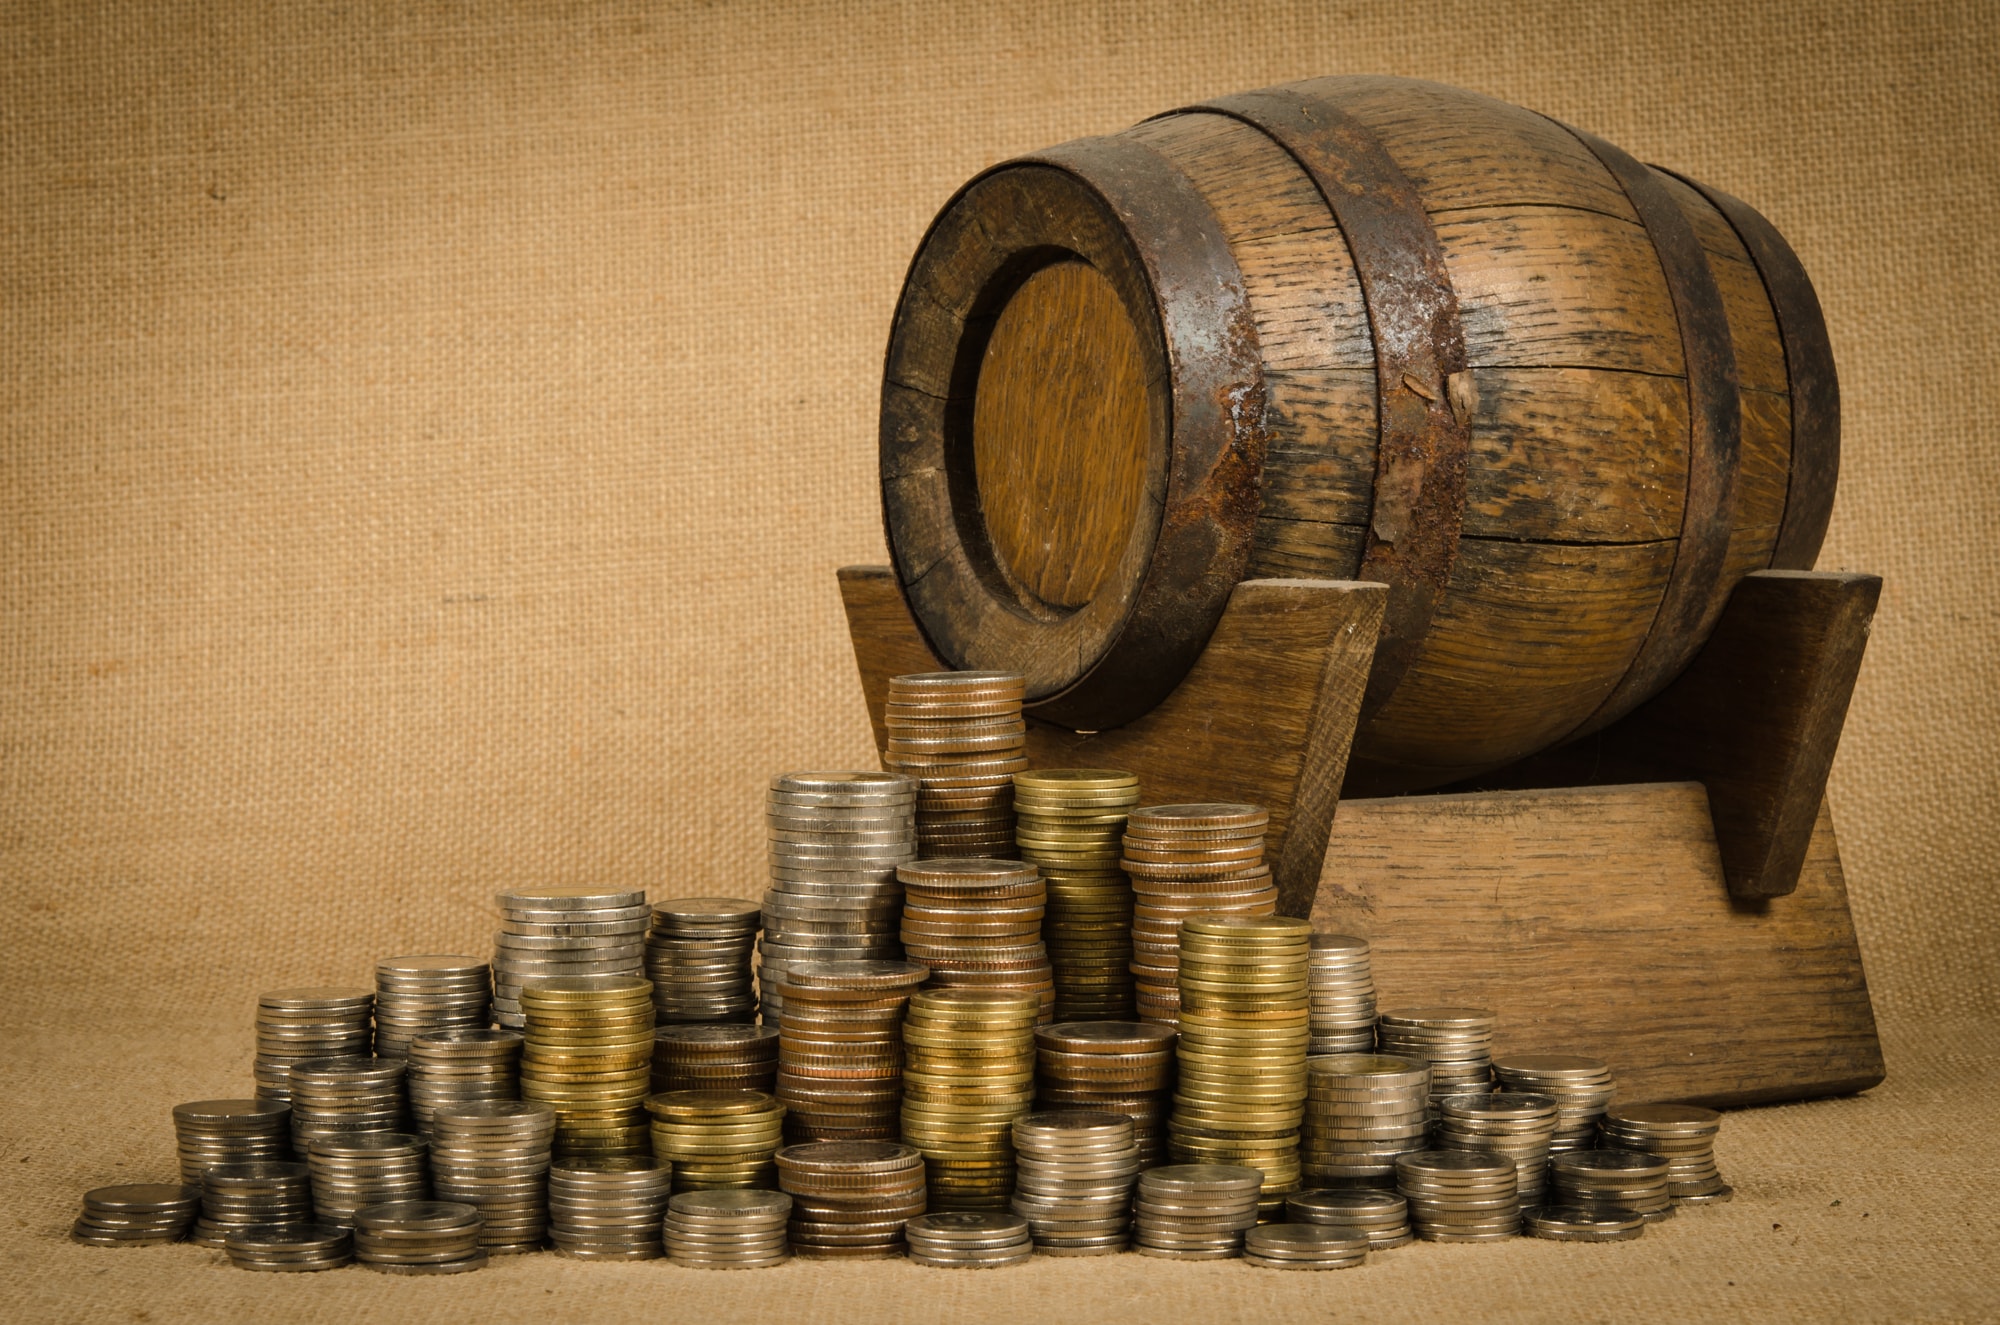 Achieve High Returns by Investing in Maturing Scotch Whisky